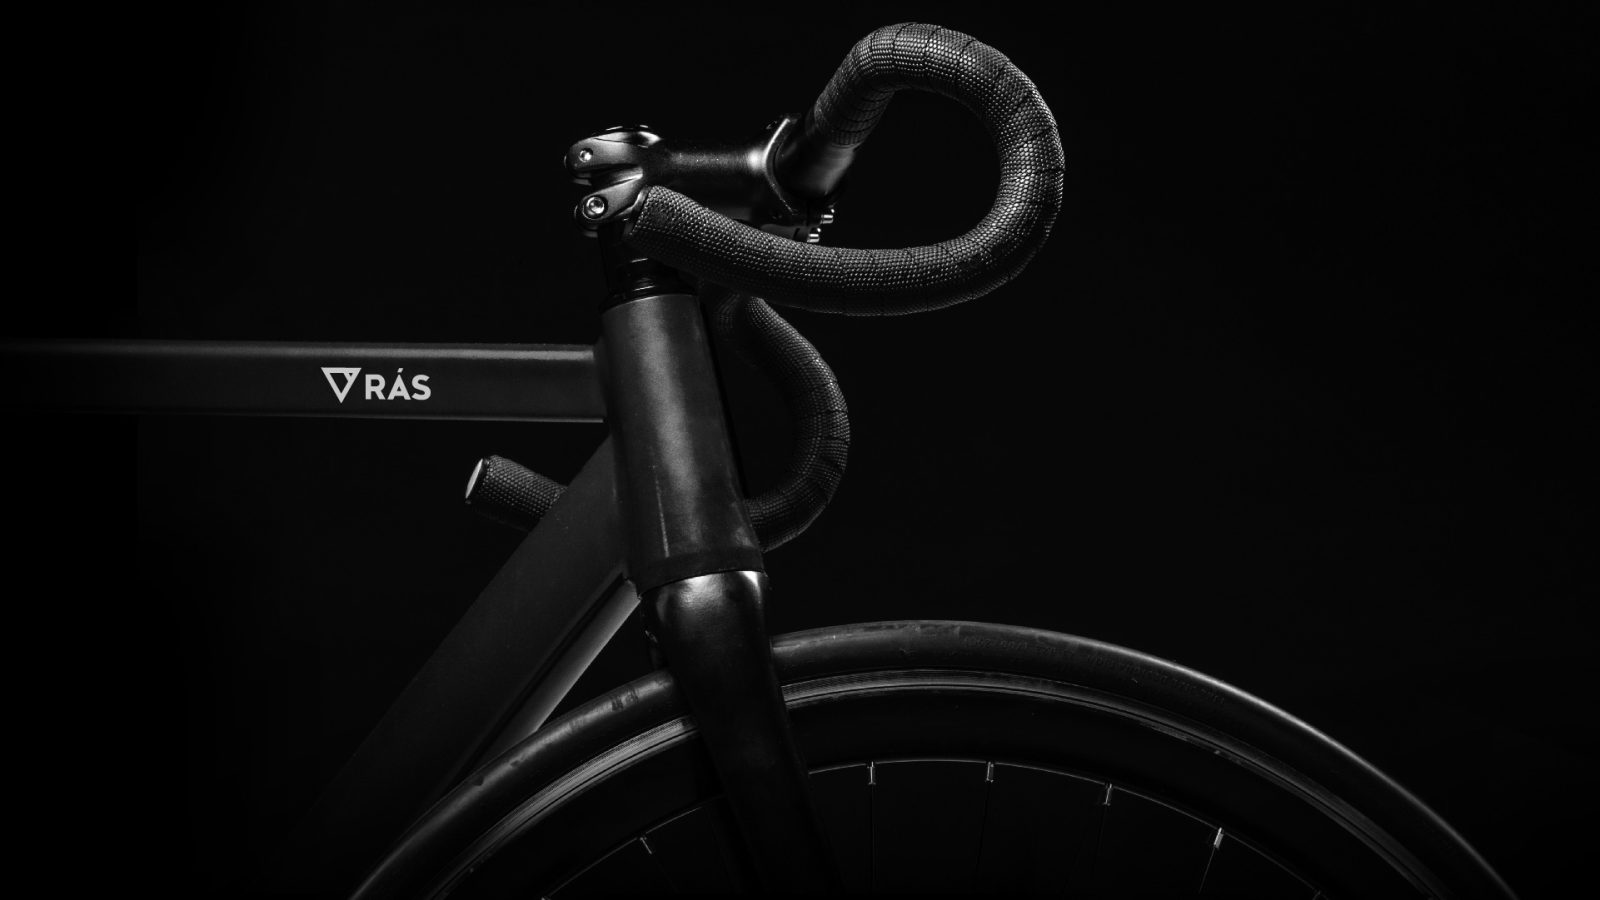 Close-up of a black racing bicycle handlebar and front frame against a dark background, highlighting its sleek brand design and minimalistic aesthetics.